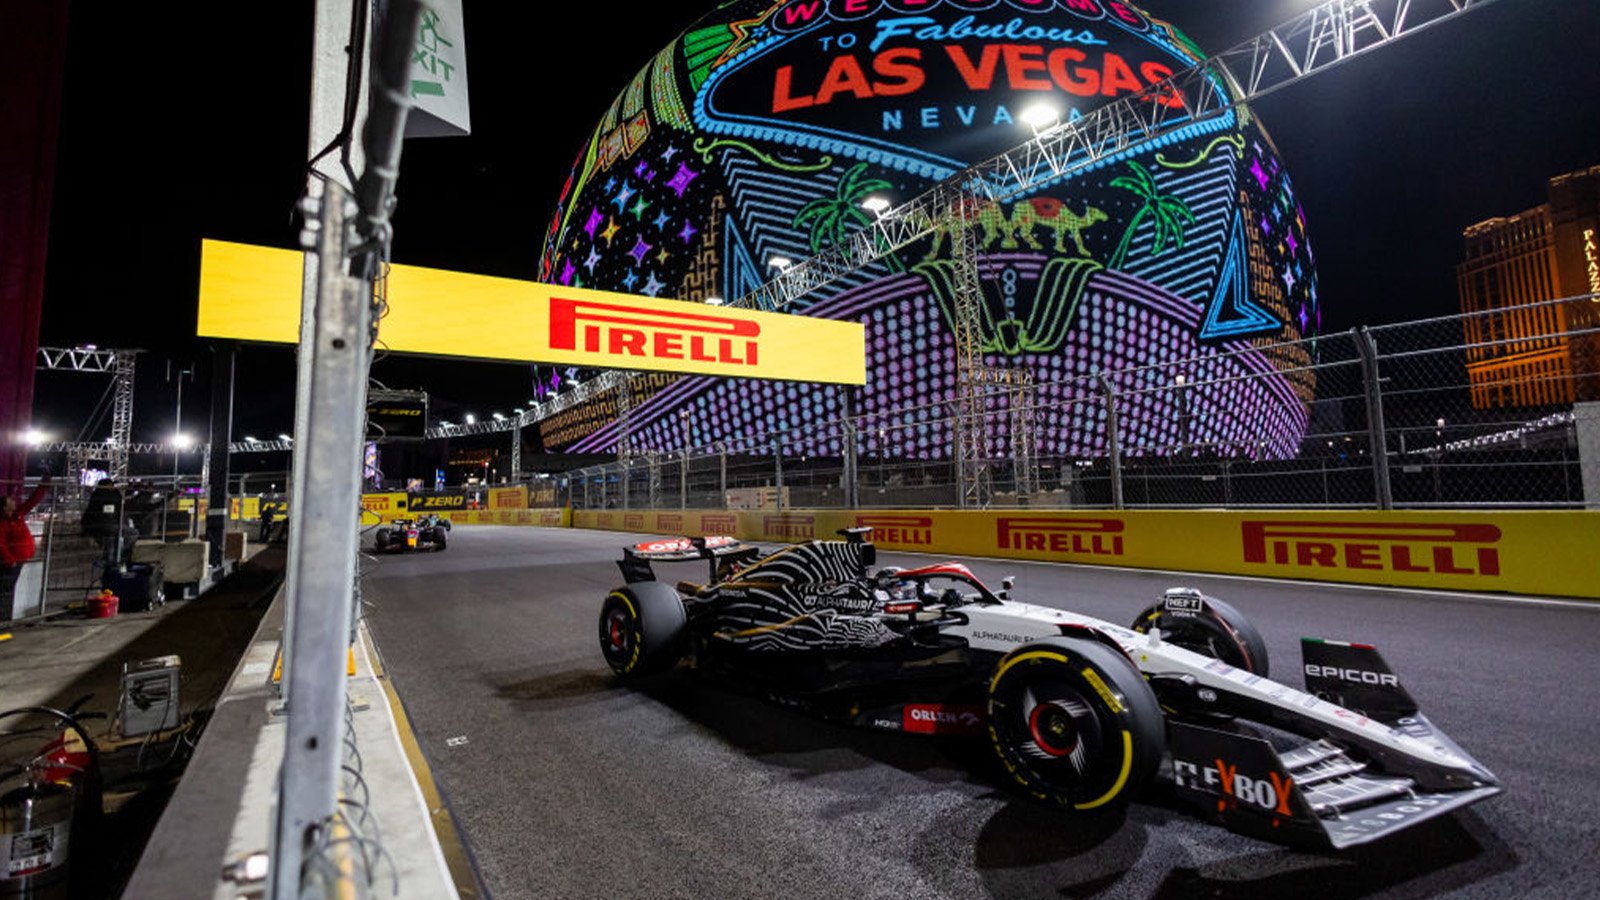 Incredible Visuals Of The 'Sphere' Singlehandedly Save Disastrous Las Vegas Grand Prix